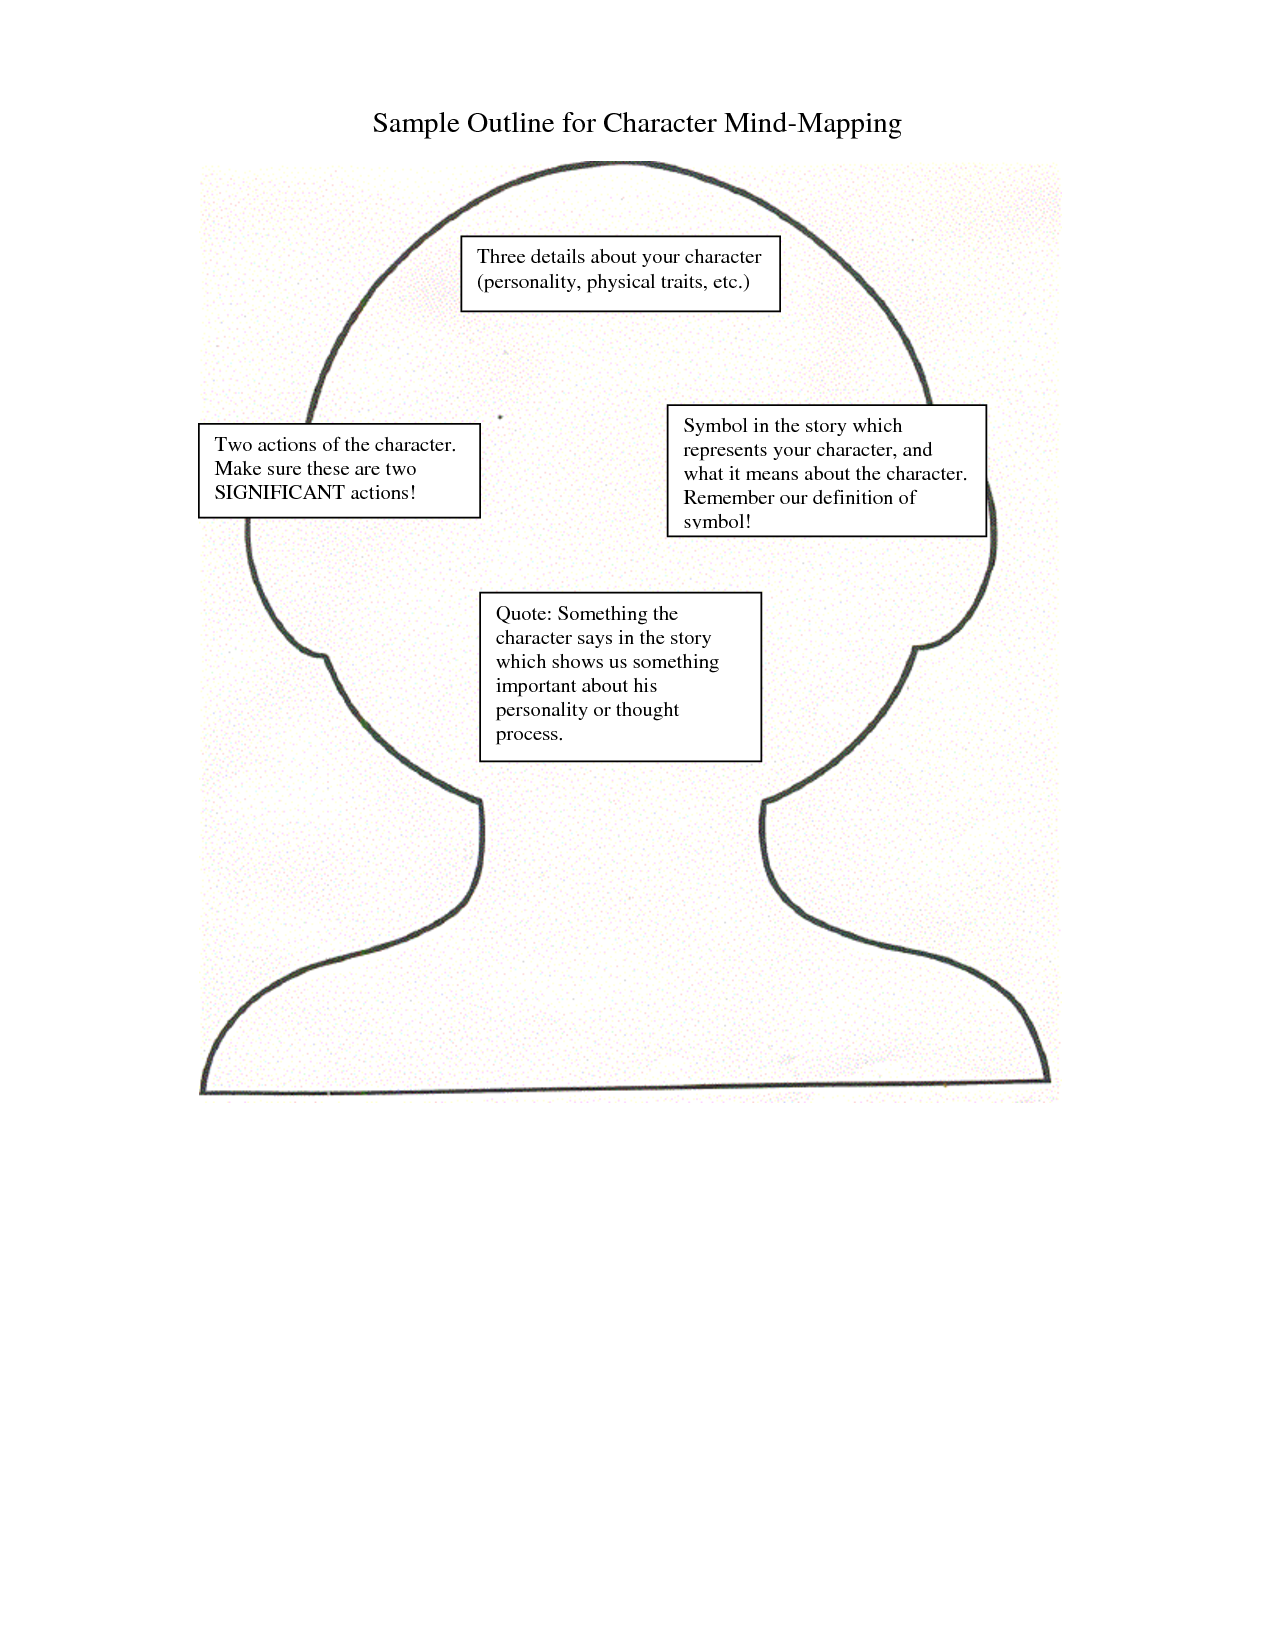 Character Outline Graphic Organizer